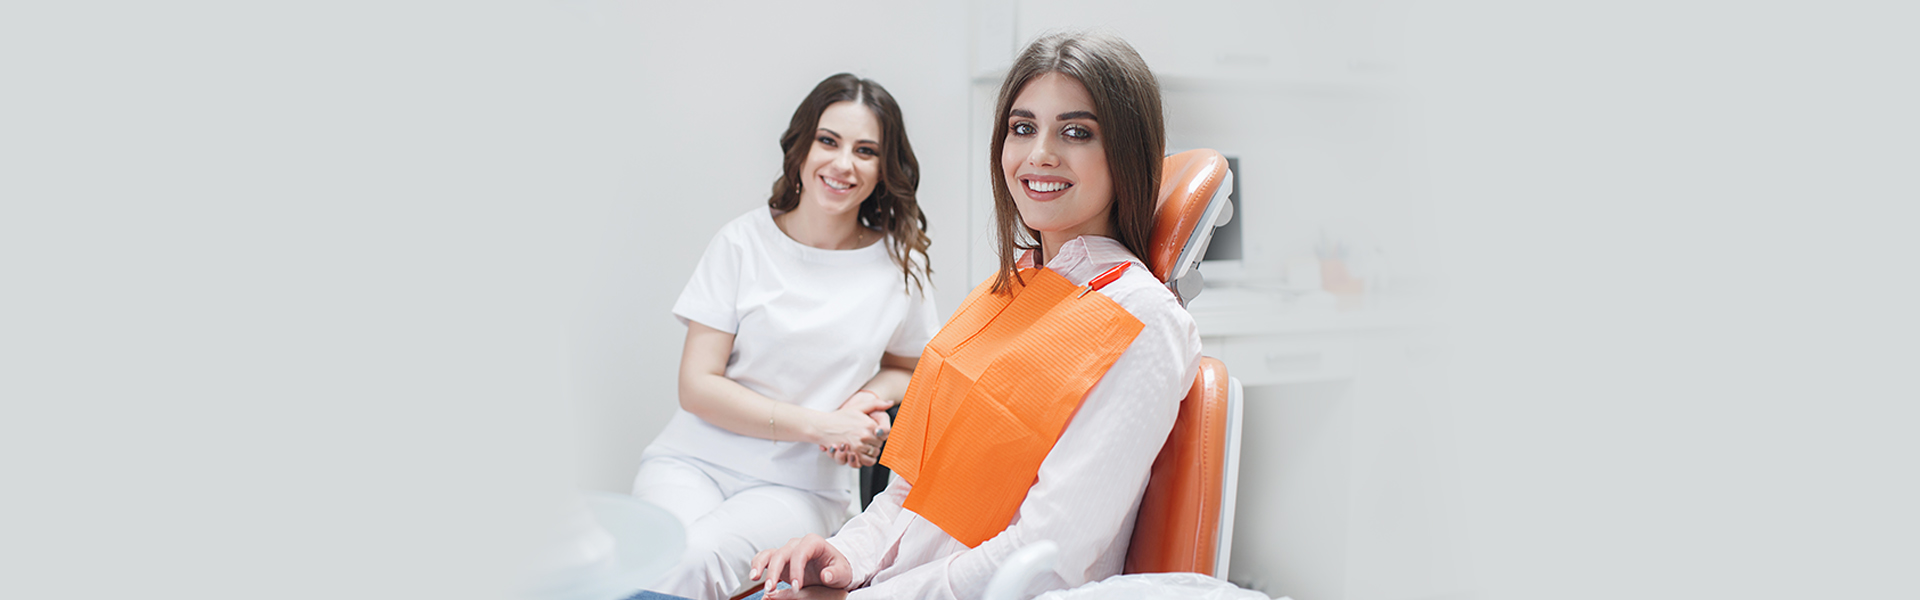 Why Get Dental Care from a Teledentistry? 